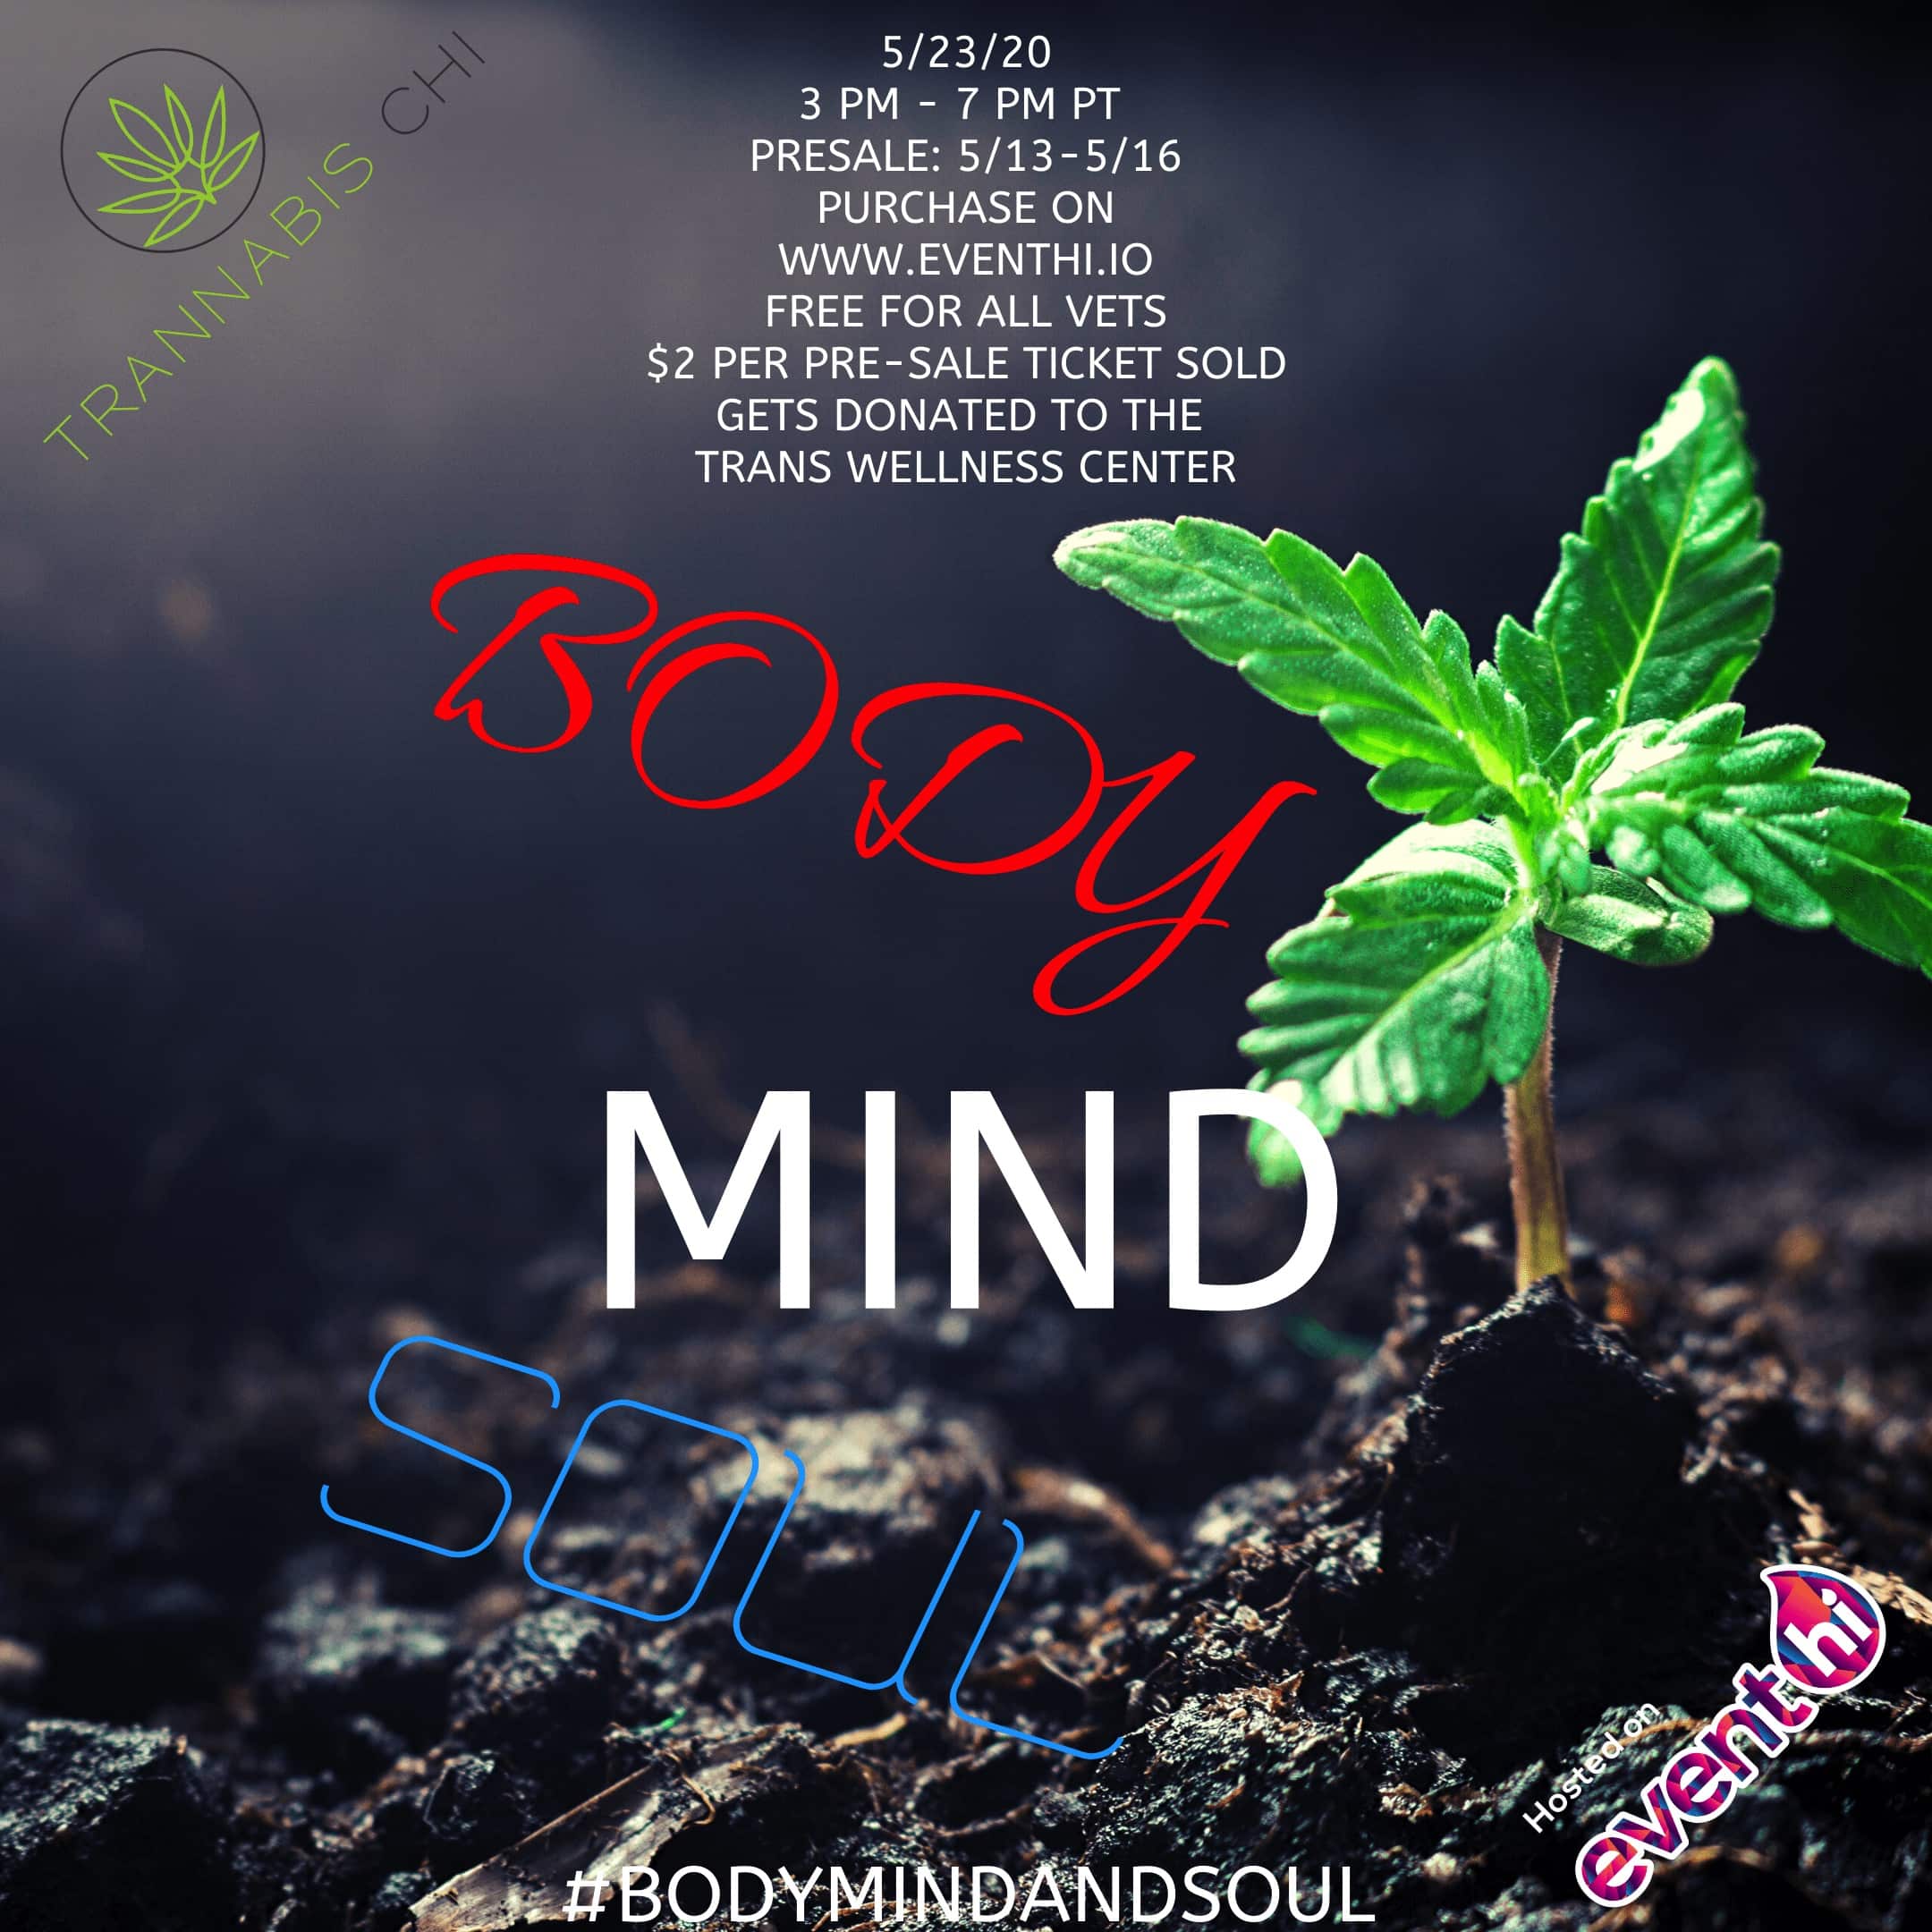 Body, Mind, and Soul: A Virtual Evening Of Healing and Rebirth